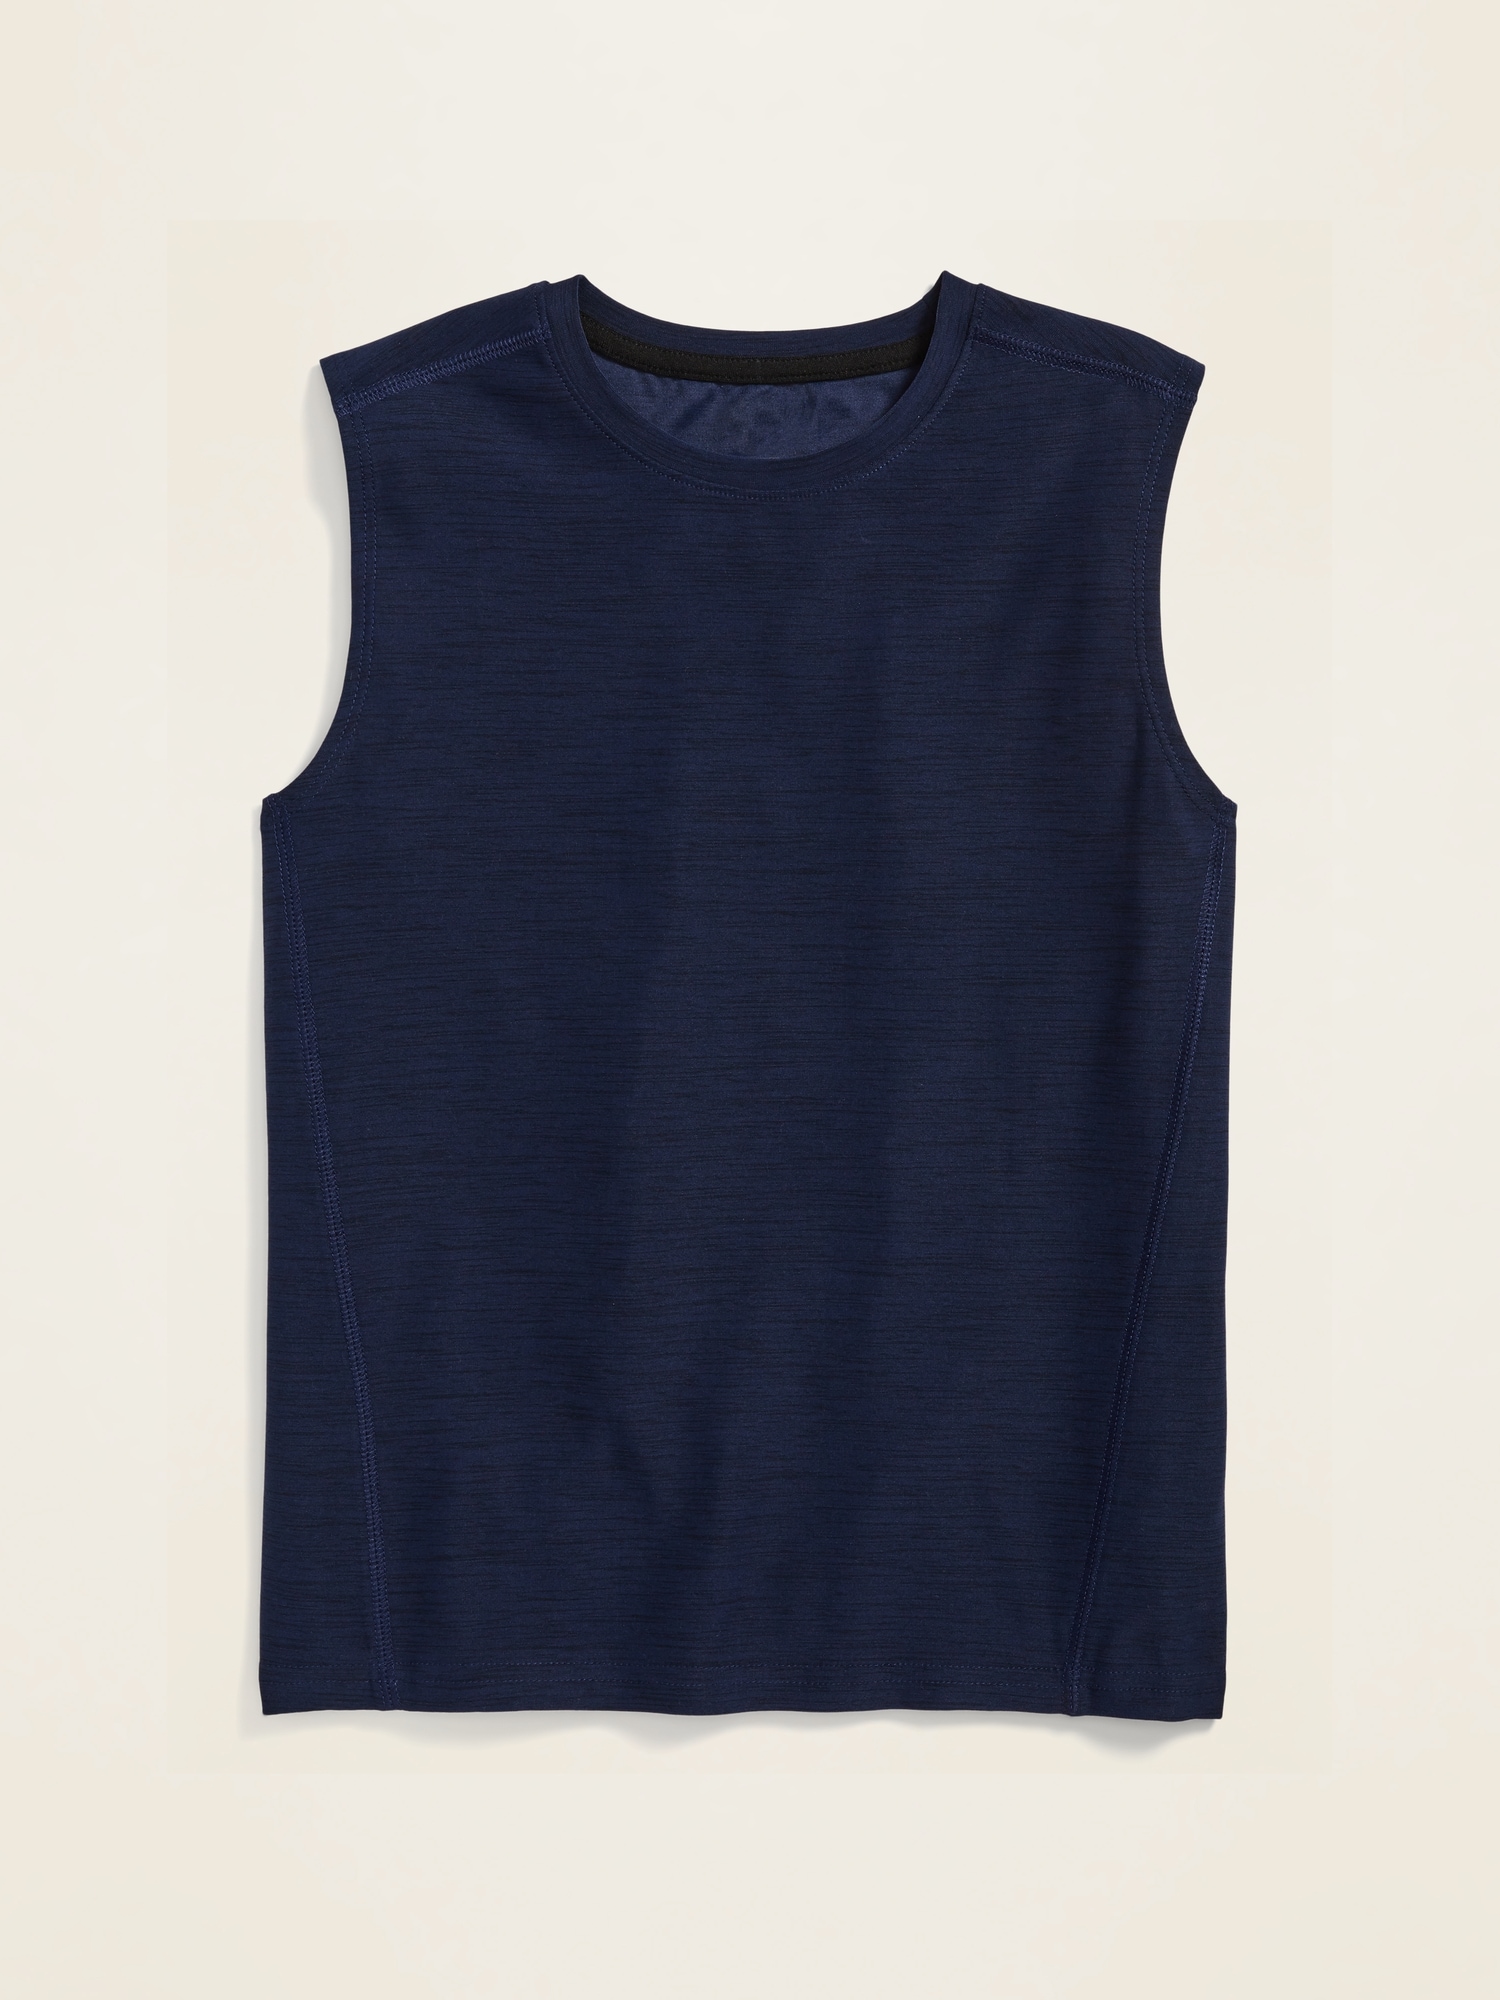 *Today Only Deal* Ultra-Soft Breathe ON Tank Top for Boys